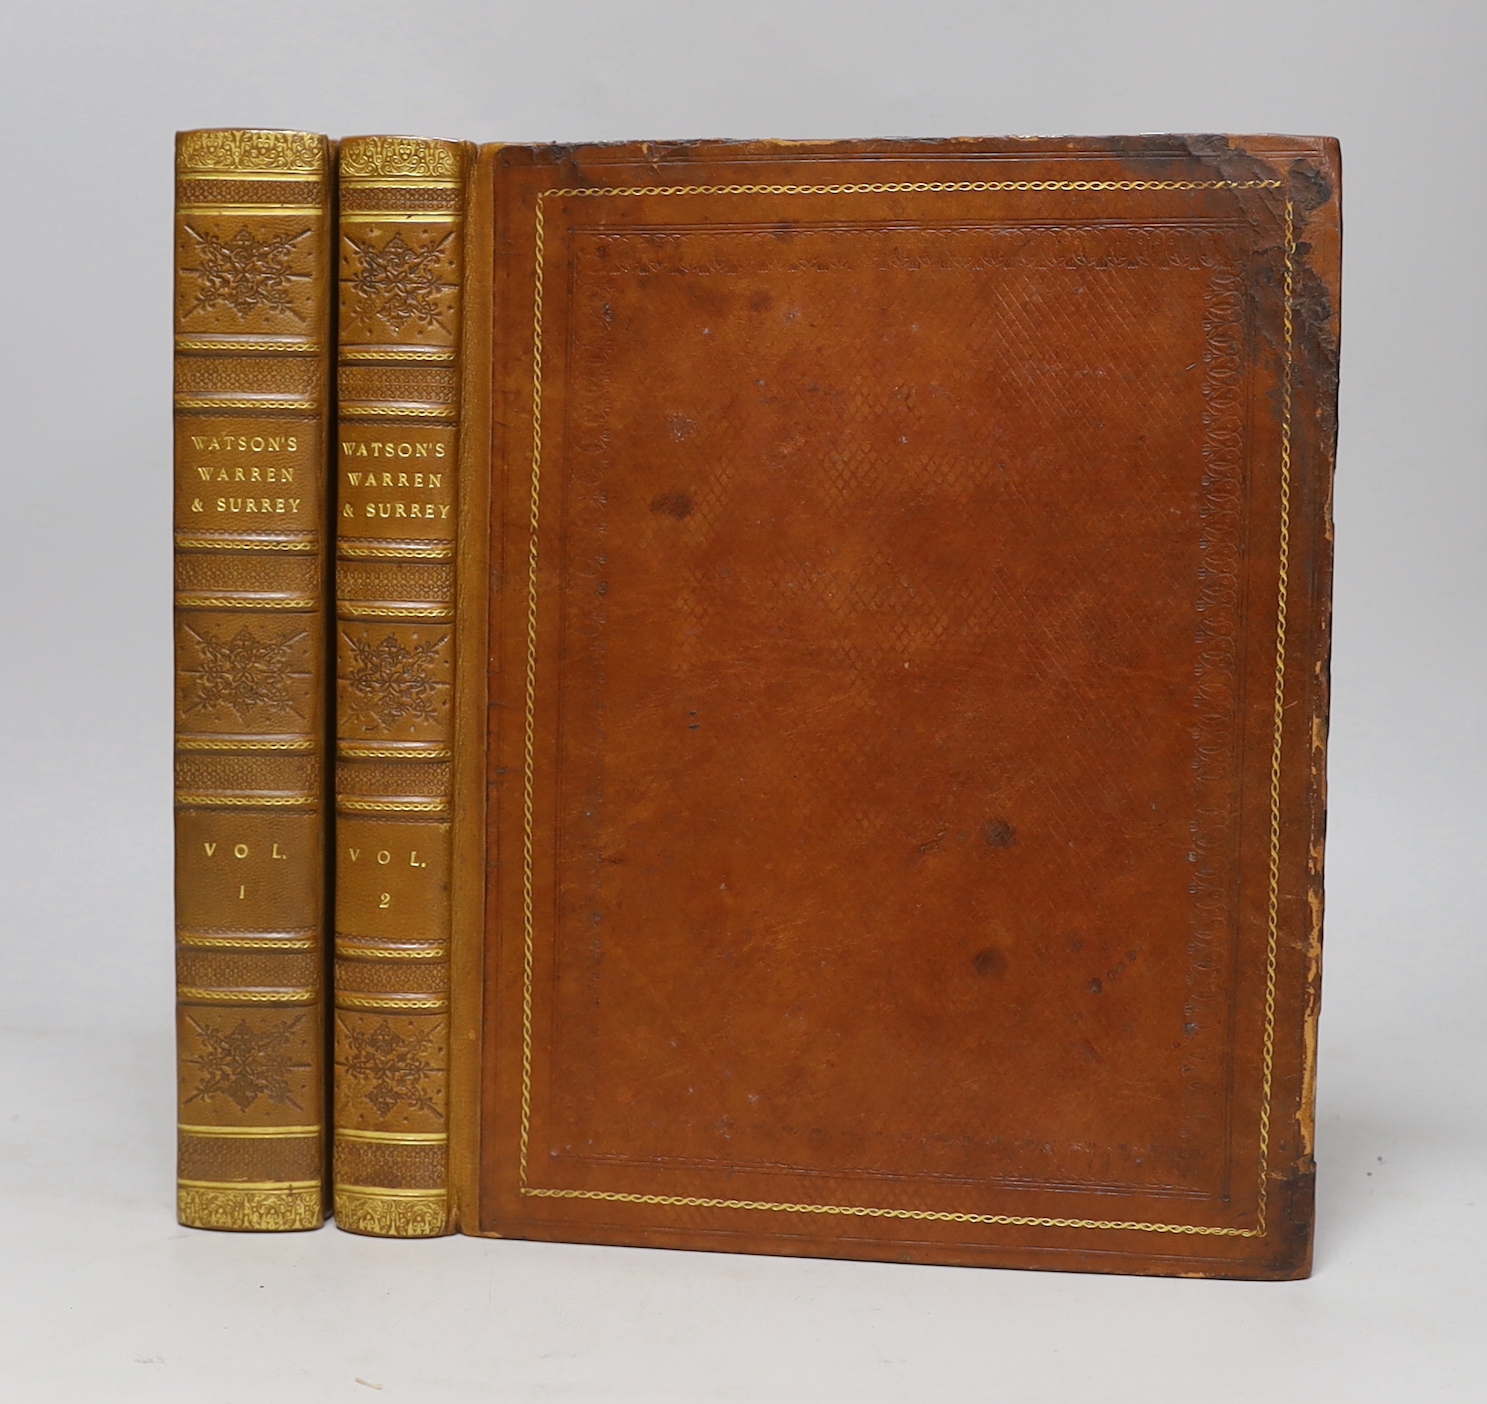 LEWES AND SURREY -Watson, Rev. John - Memoirs of the Ancient Earls of Warren and Surrey and their Descendants to the Present Time, 2 vols, 1st published edition, 4to, diced calf rebacked, engraved portrait frontispiece,